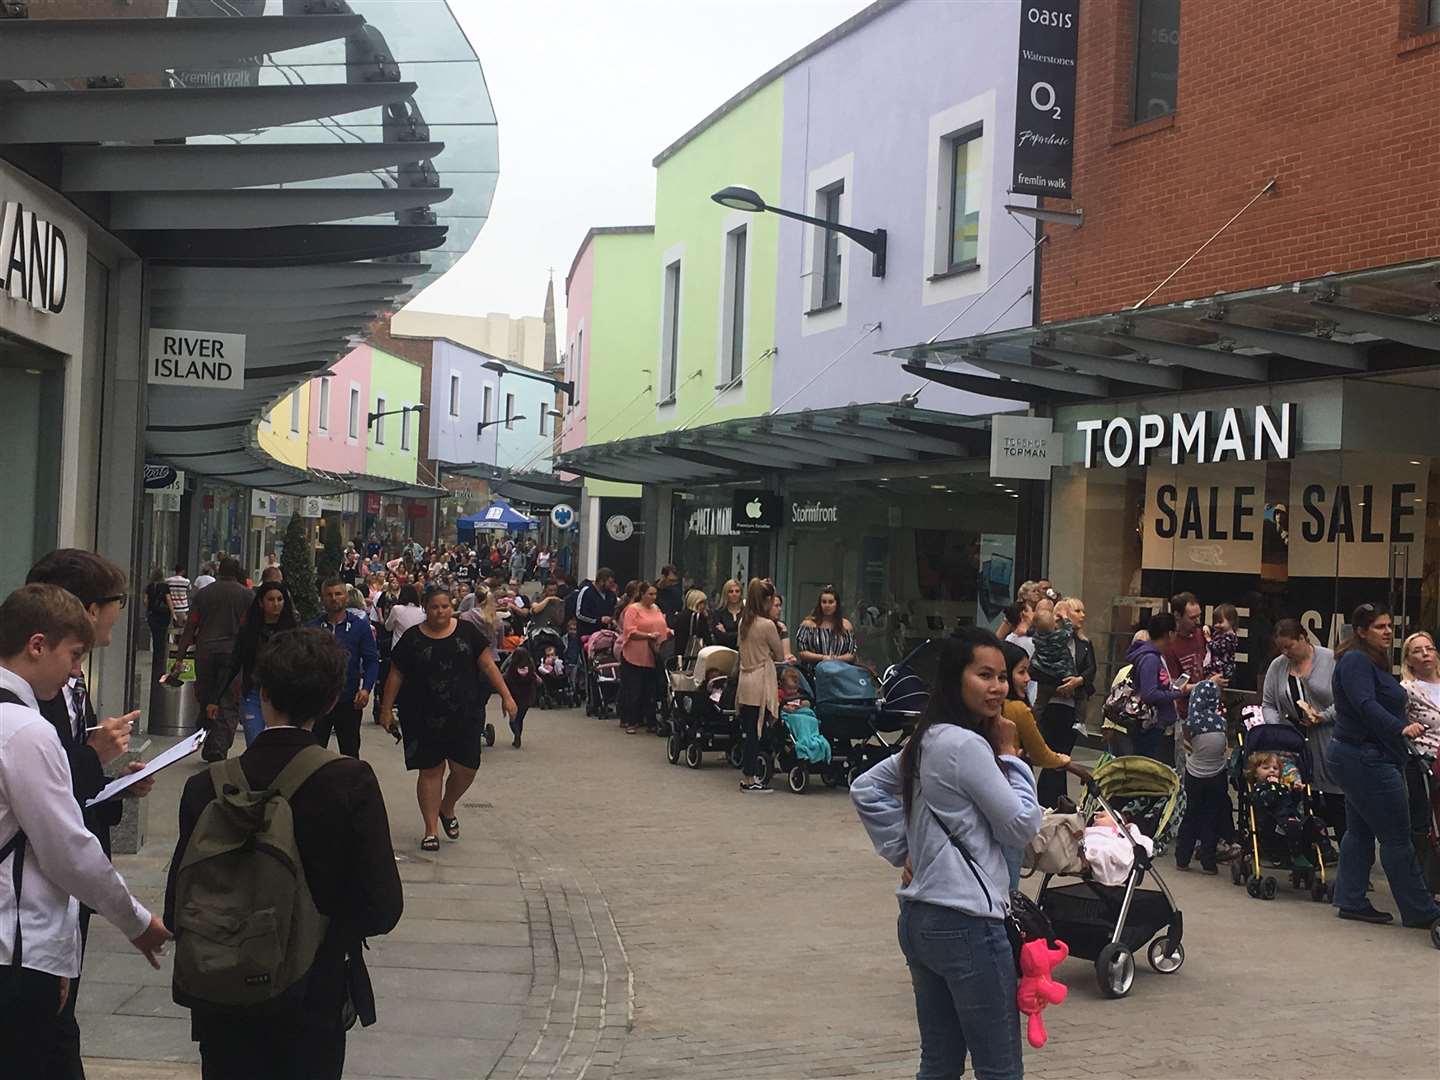 Shoppers queuing for hours to get inside Build a Bear. (3034304)